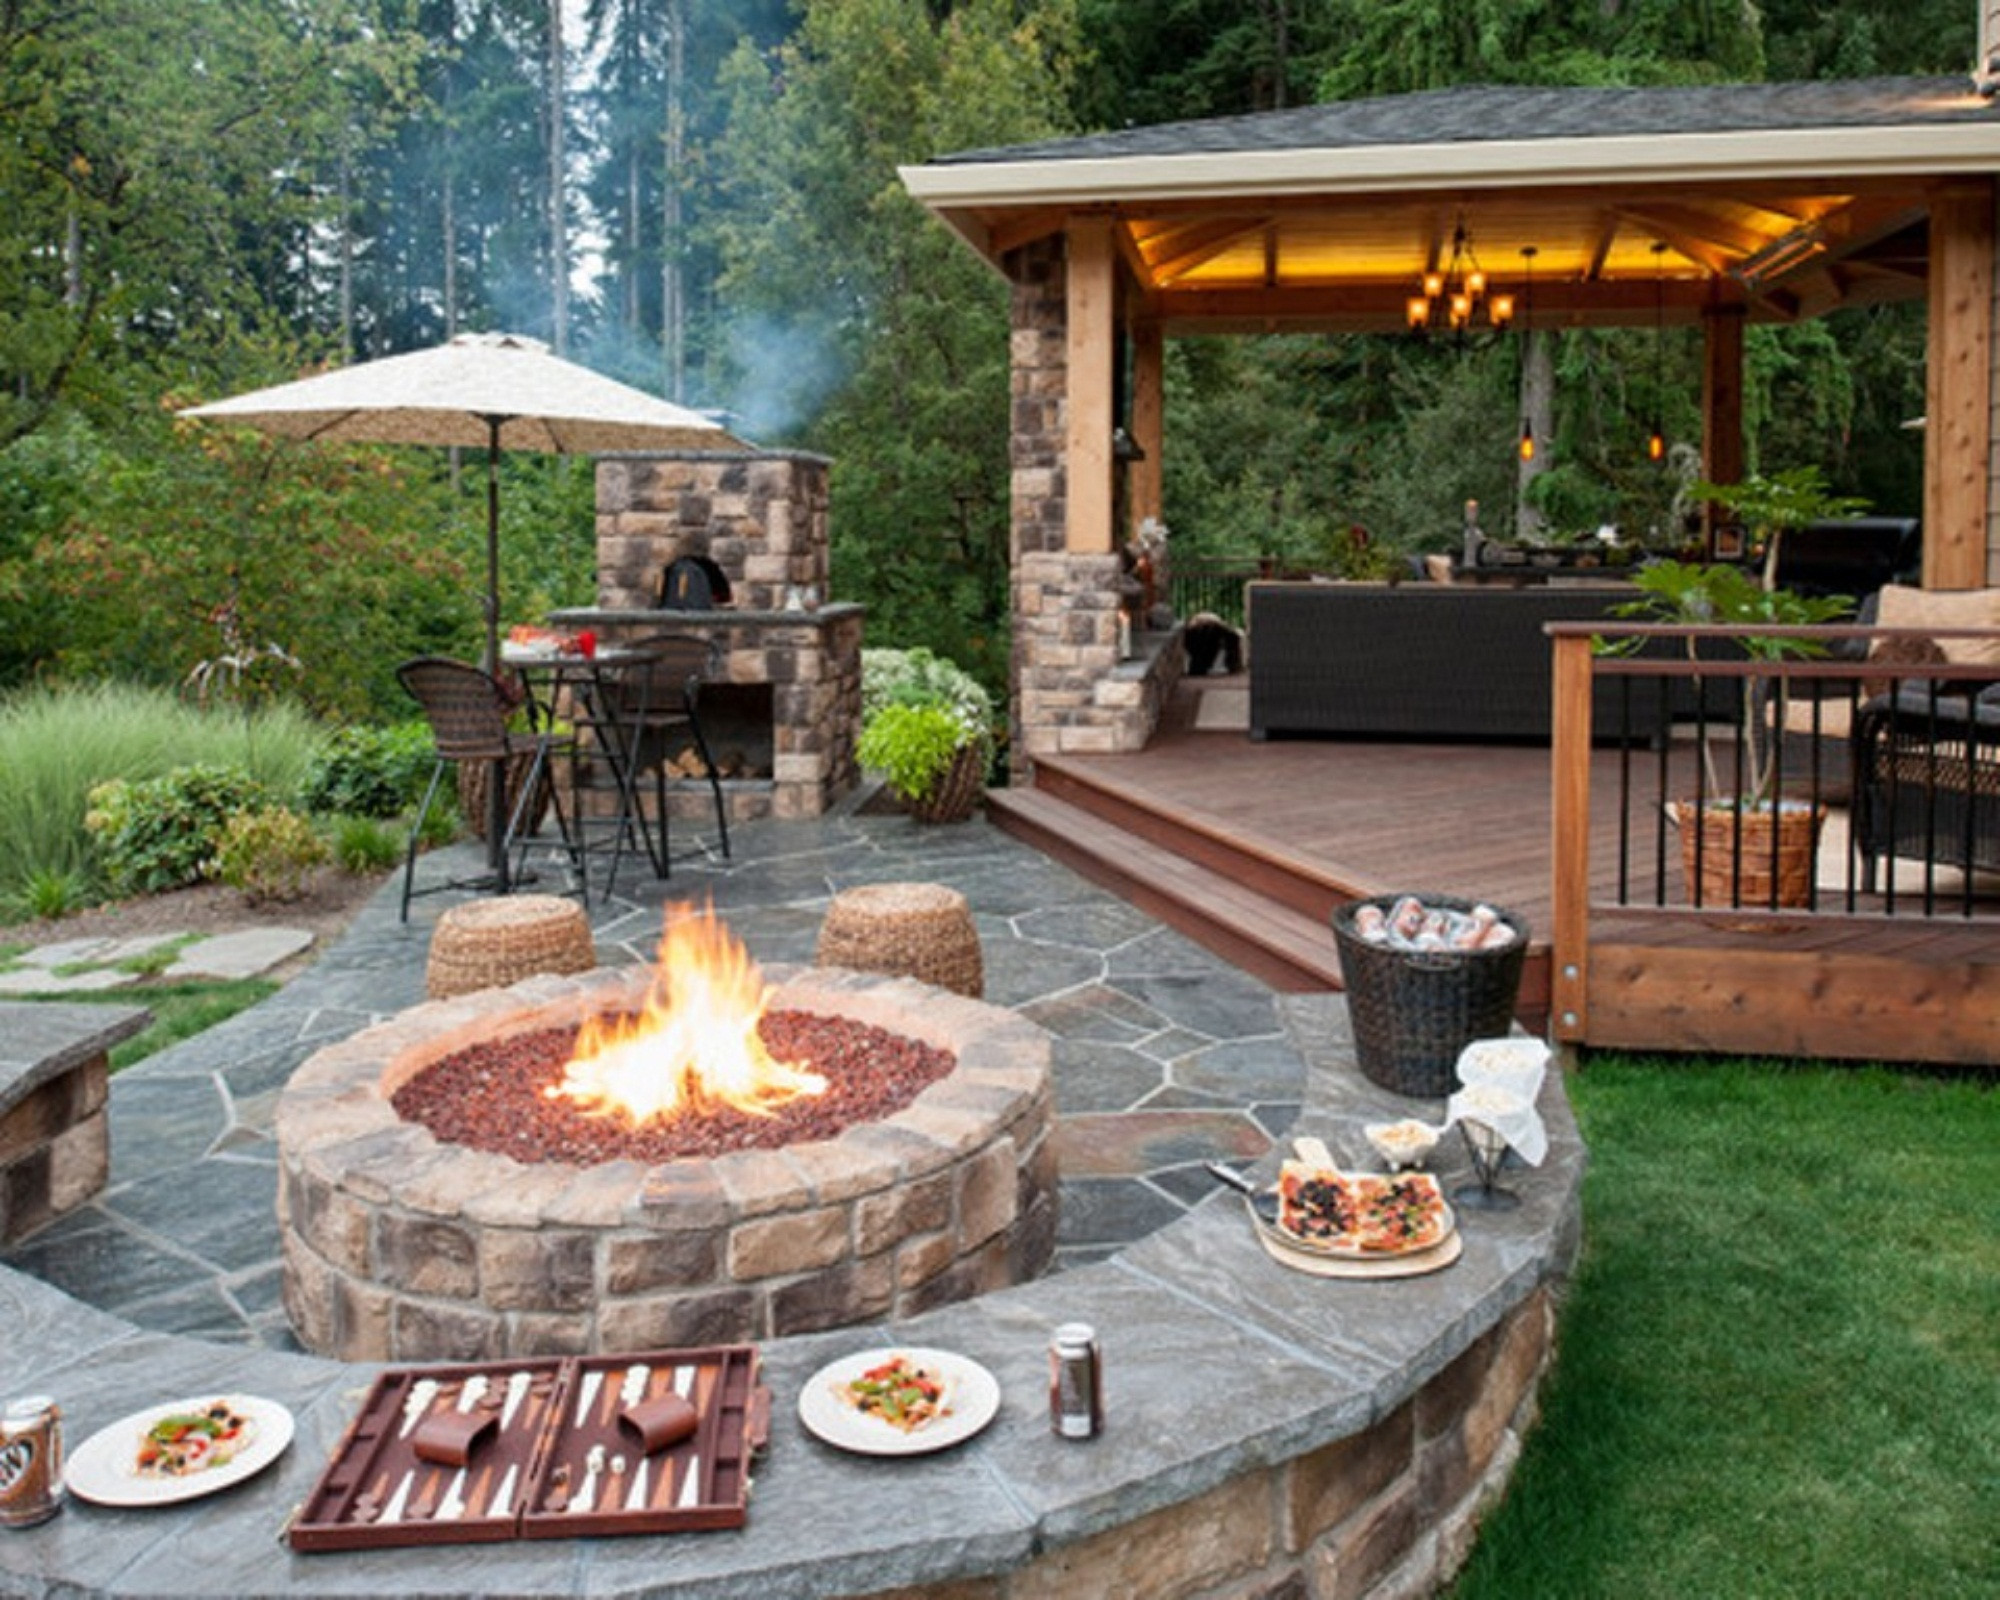 Outdoor Kitchen With Fireplace
 Upgrade Your Backyard with an Outdoor Kitchen